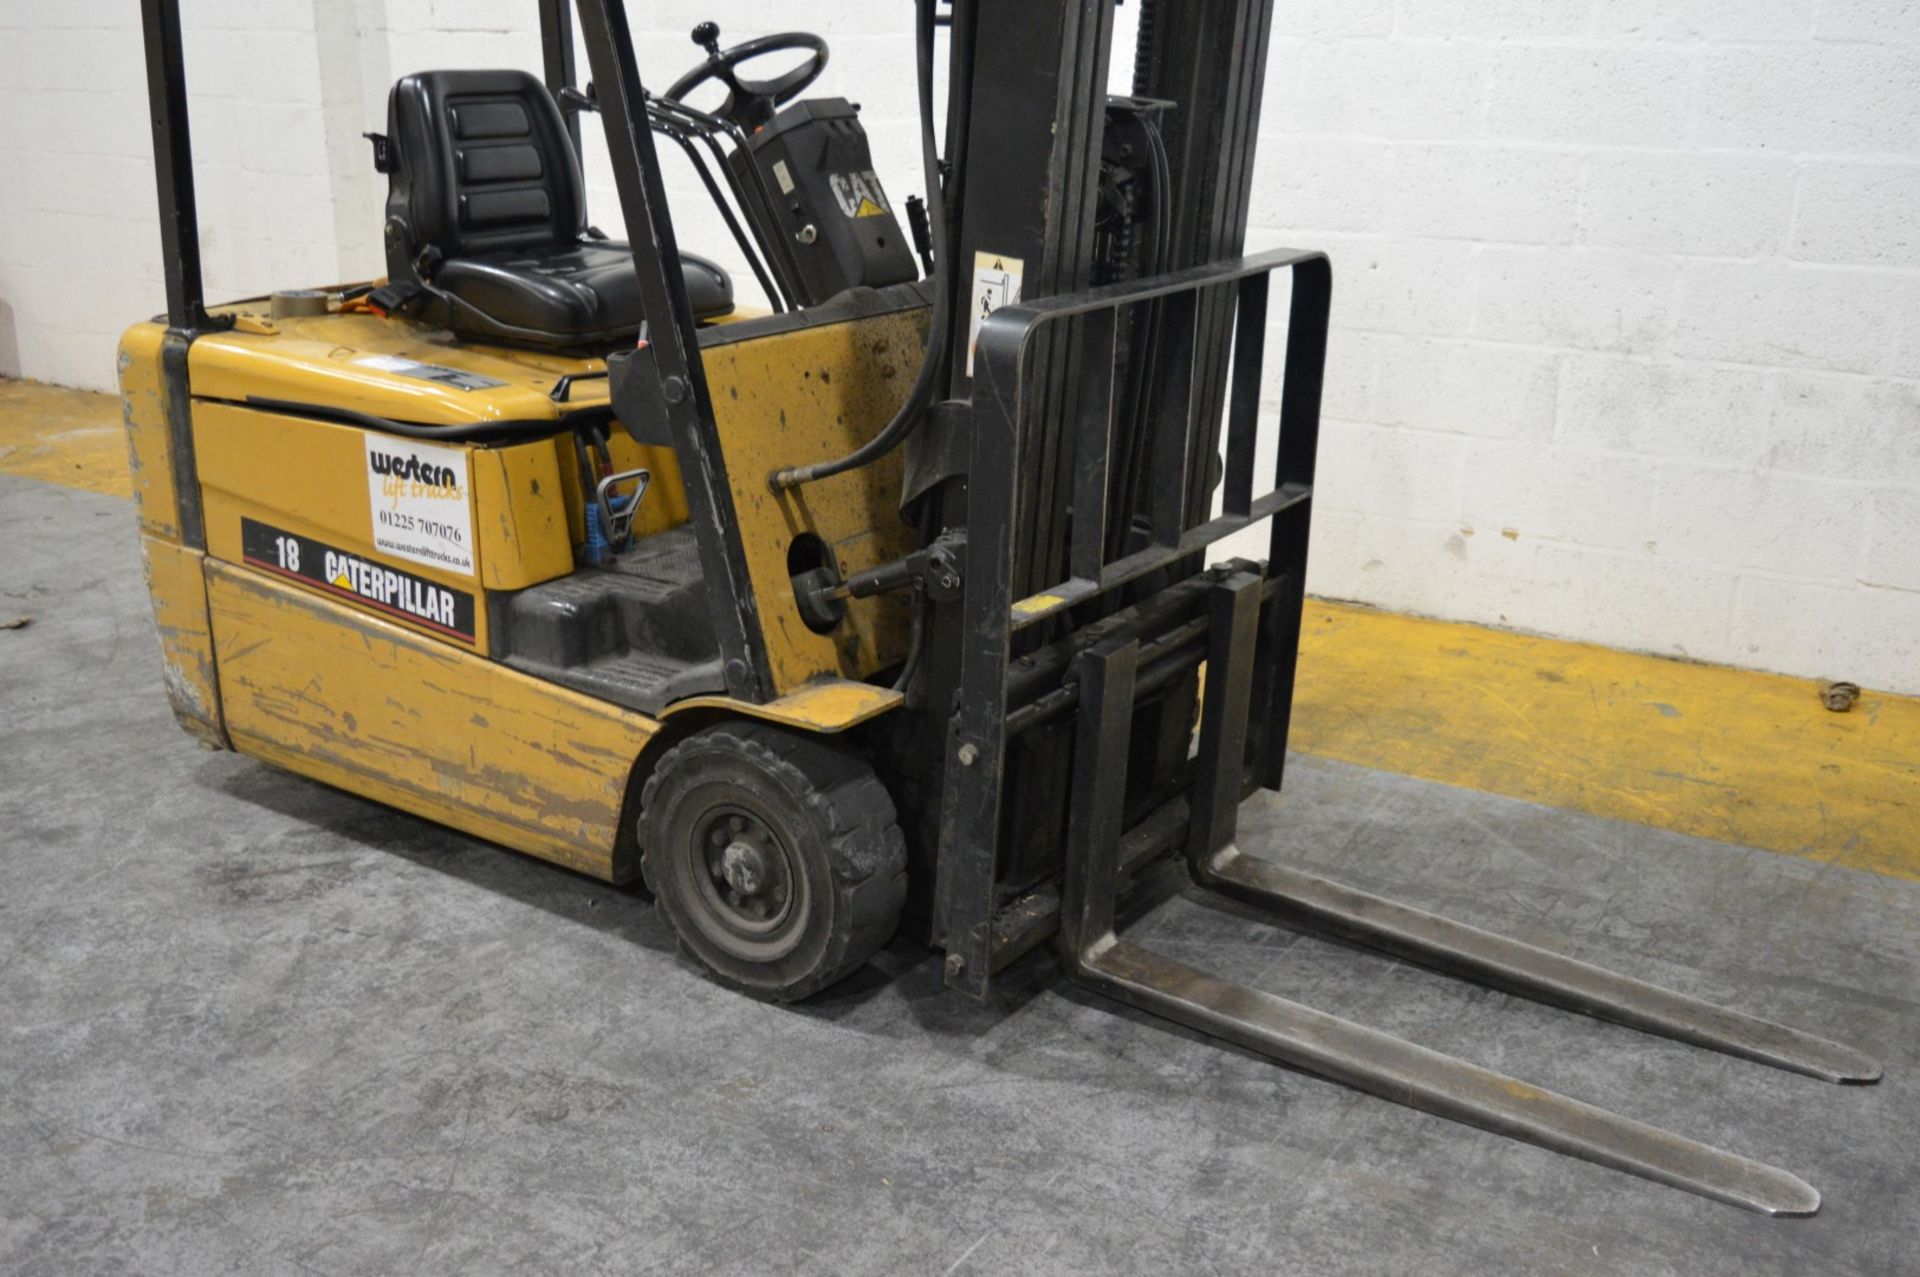 1 x Caterpillar Electric Counter Balance Forklift Truck - Model EP18KT - 1800kg Basic Capacity - - Image 5 of 14